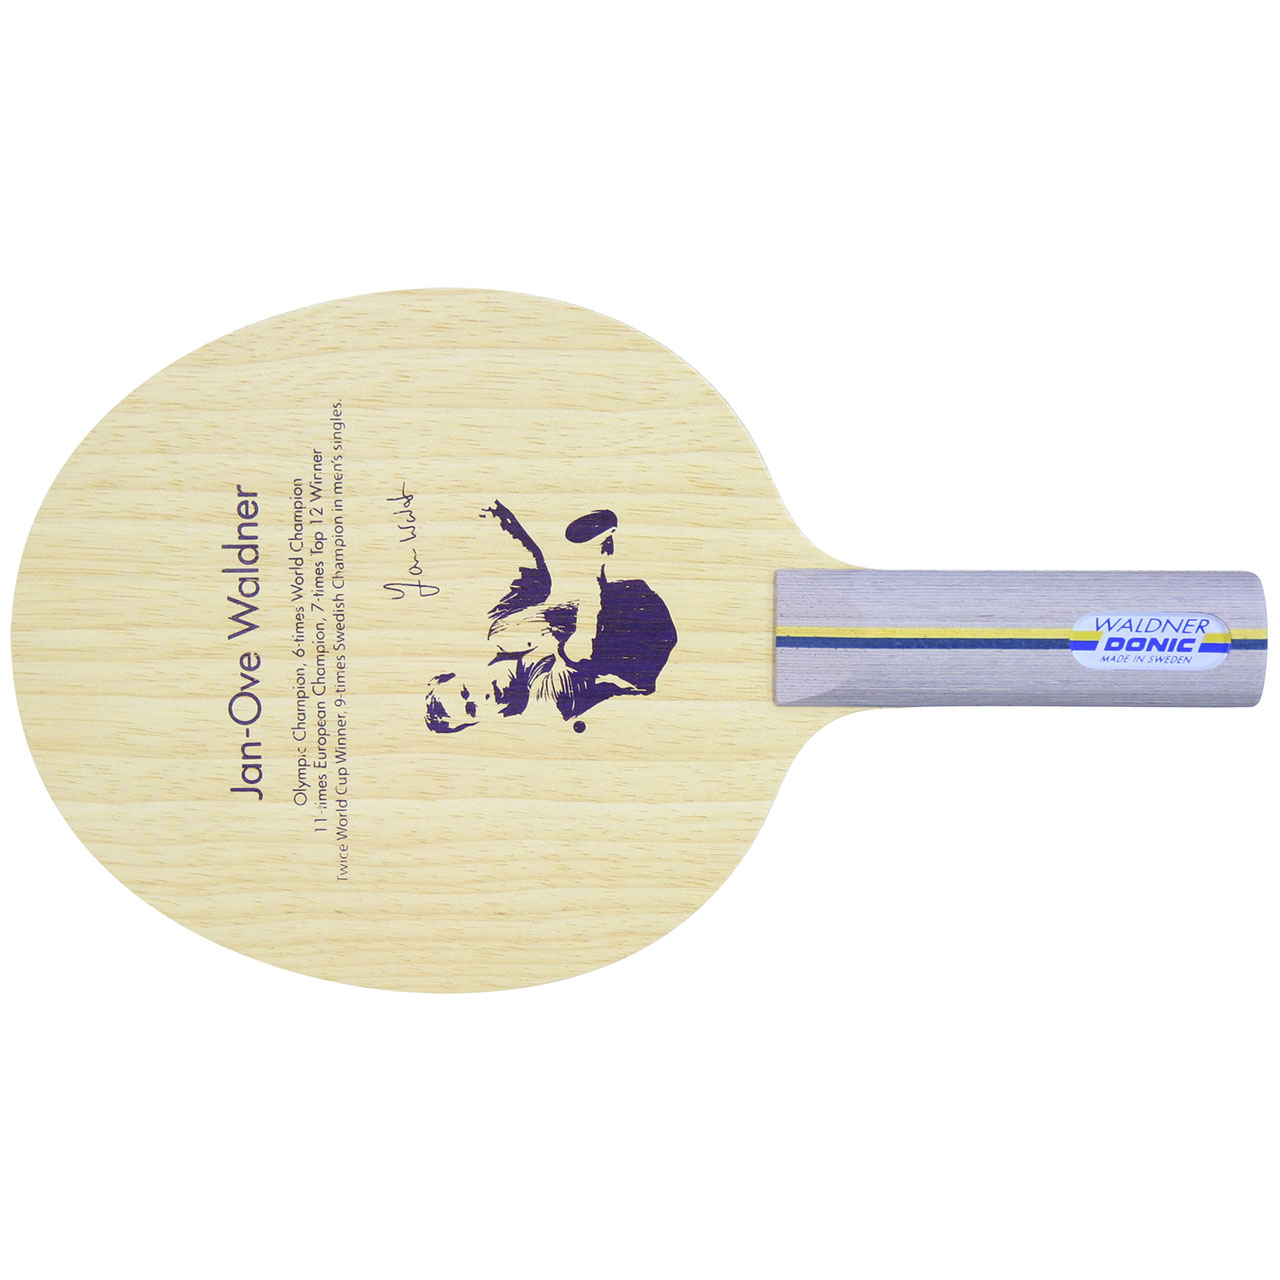 Donic Waldner Offensiv 2016 Table Tennis Blade 